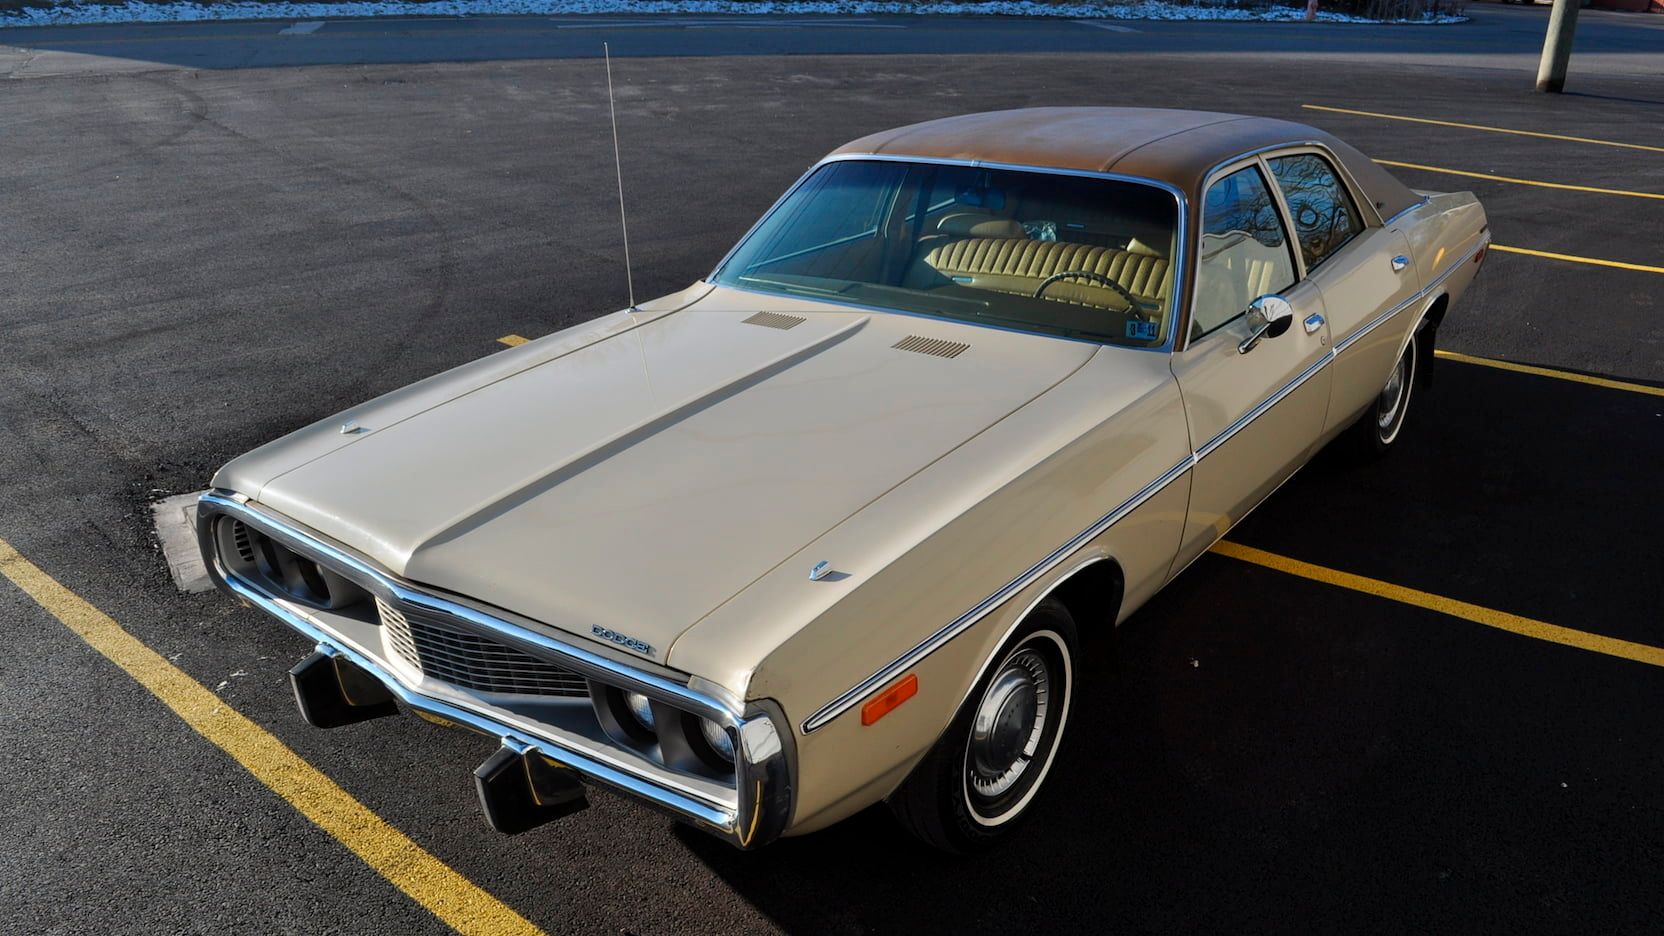 A parked 1973 Dodge Coronet